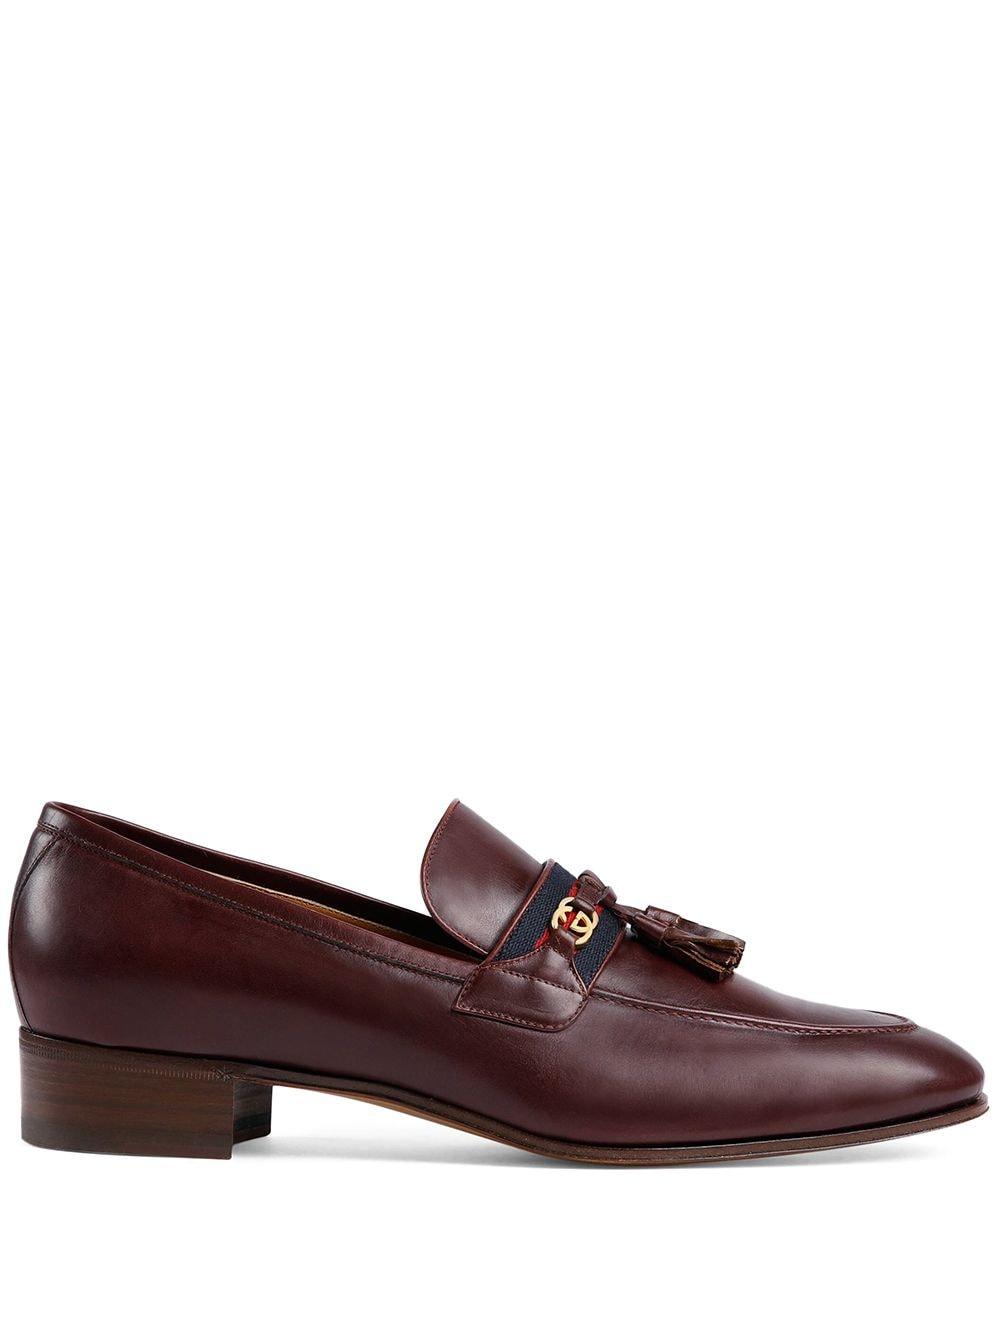 Gucci Leather Paride Gg Slip On Loafers in Brown for Men - Save 34% - Lyst